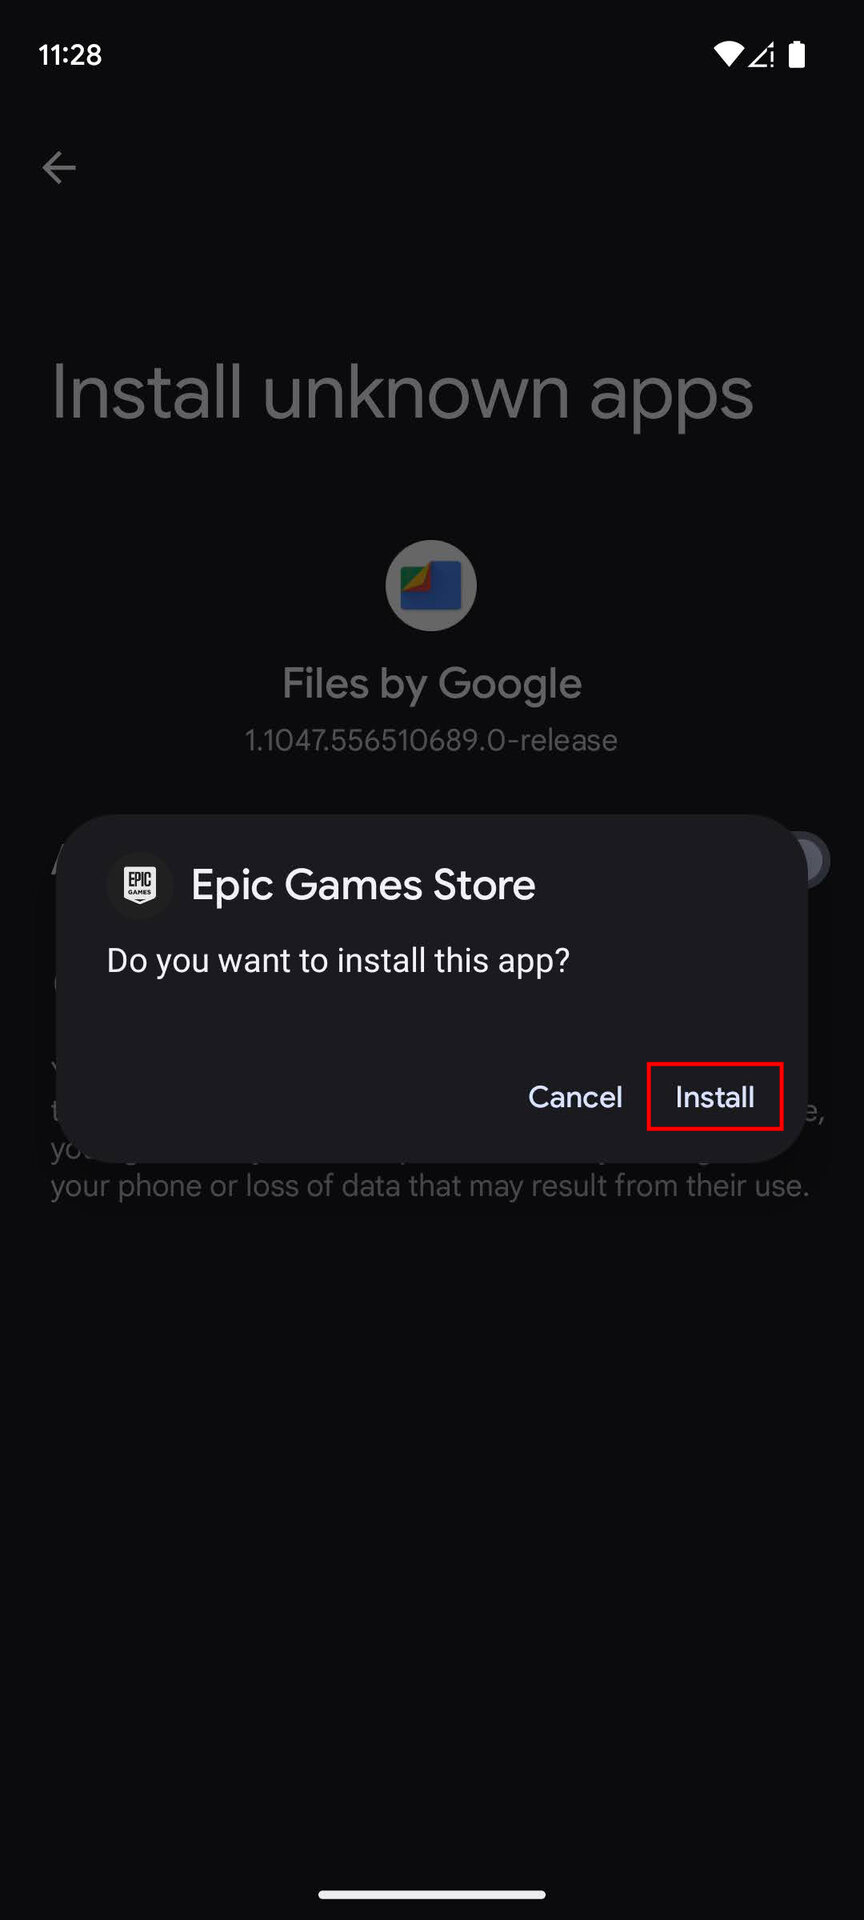 How to install an app from App Center, Play Store or using an APK